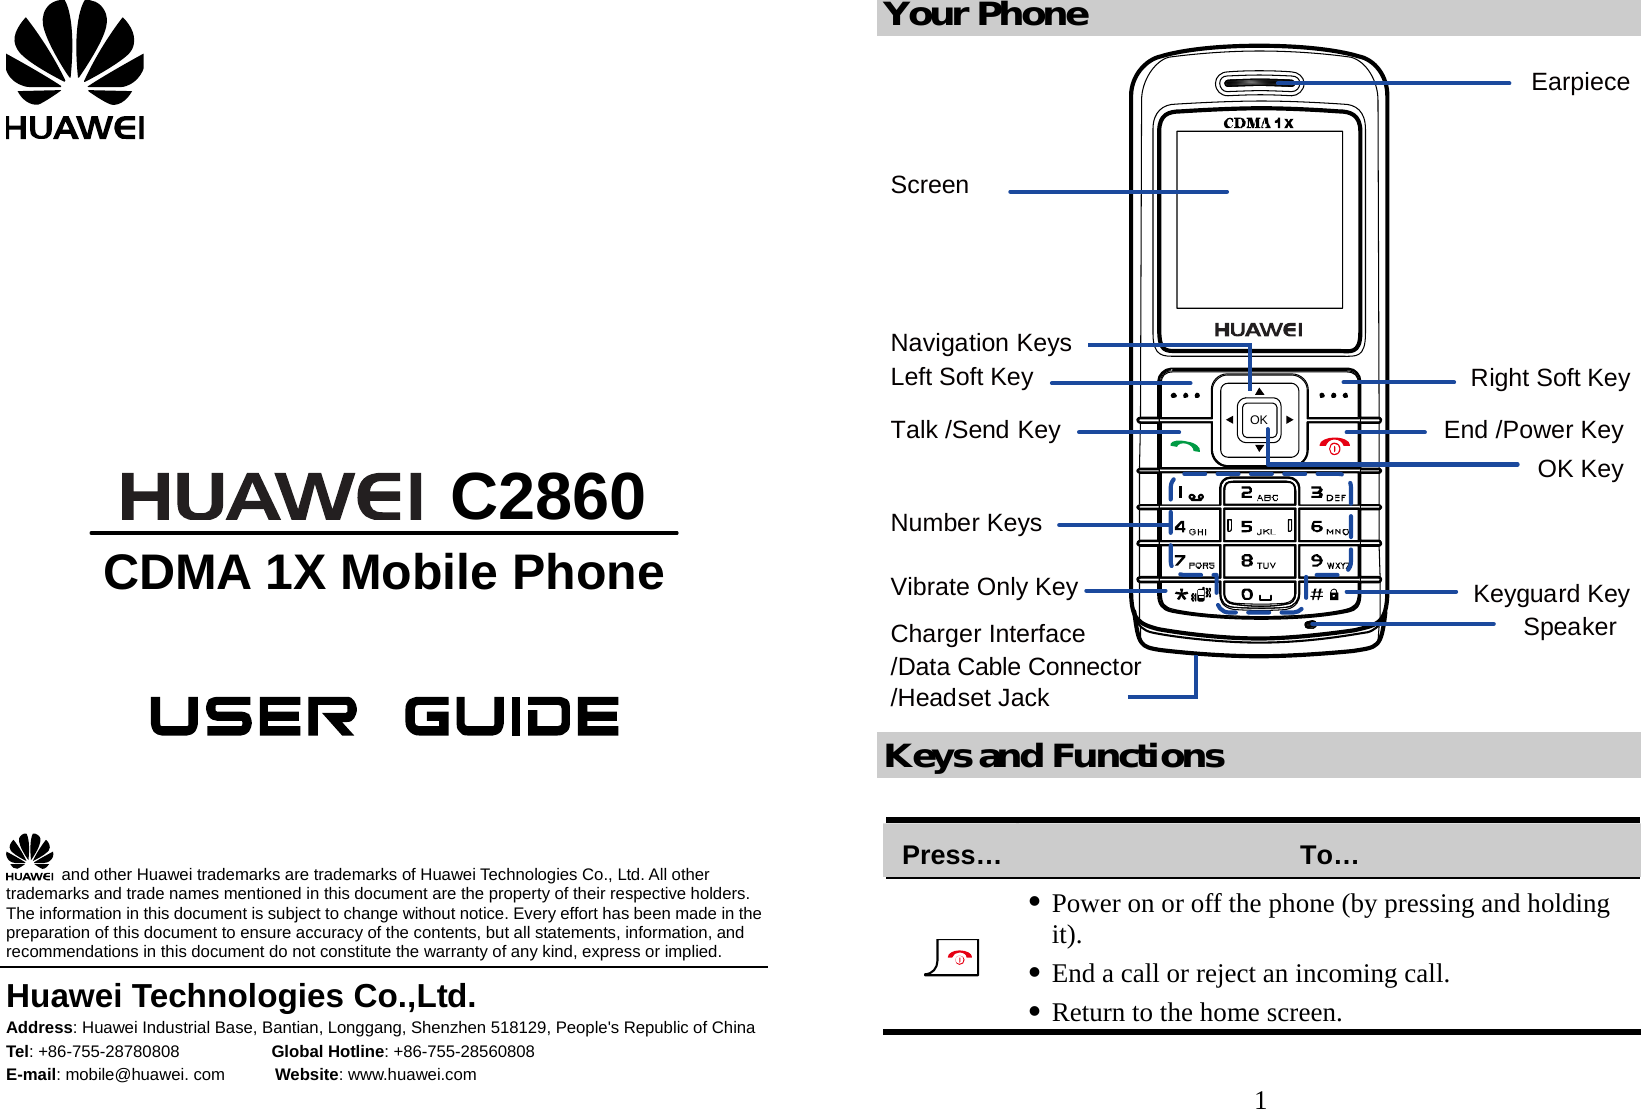          C2860 CDMA 1X Mobile Phone        and other Huawei trademarks are trademarks of Huawei Technologies Co., Ltd. All other trademarks and trade names mentioned in this document are the property of their respective holders. The information in this document is subject to change without notice. Every effort has been made in the preparation of this document to ensure accuracy of the contents, but all statements, information, and recommendations in this document do not constitute the warranty of any kind, express or implied. Huawei Technologies Co.,Ltd. Address: Huawei Industrial Base, Bantian, Longgang, Shenzhen 518129, People&apos;s Republic of China Tel: +86-755-28780808           Global Hotline: +86-755-28560808 E-mail: mobile@huawei. com      Website: www.huawei.com 1 Your Phone OKEarpieceNumber KeysNavigation KeysLeft Soft KeyKeyguard KeyRight Soft KeyEnd /Power KeyVibrate Only KeyTalk /Send KeySpeakerOK KeyCharger Interface/Headset JackScreen/Data Cable Connector Keys and Functions  Press… To…  z Power on or off the phone (by pressing and holding it). z End a call or reject an incoming call. z Return to the home screen. 